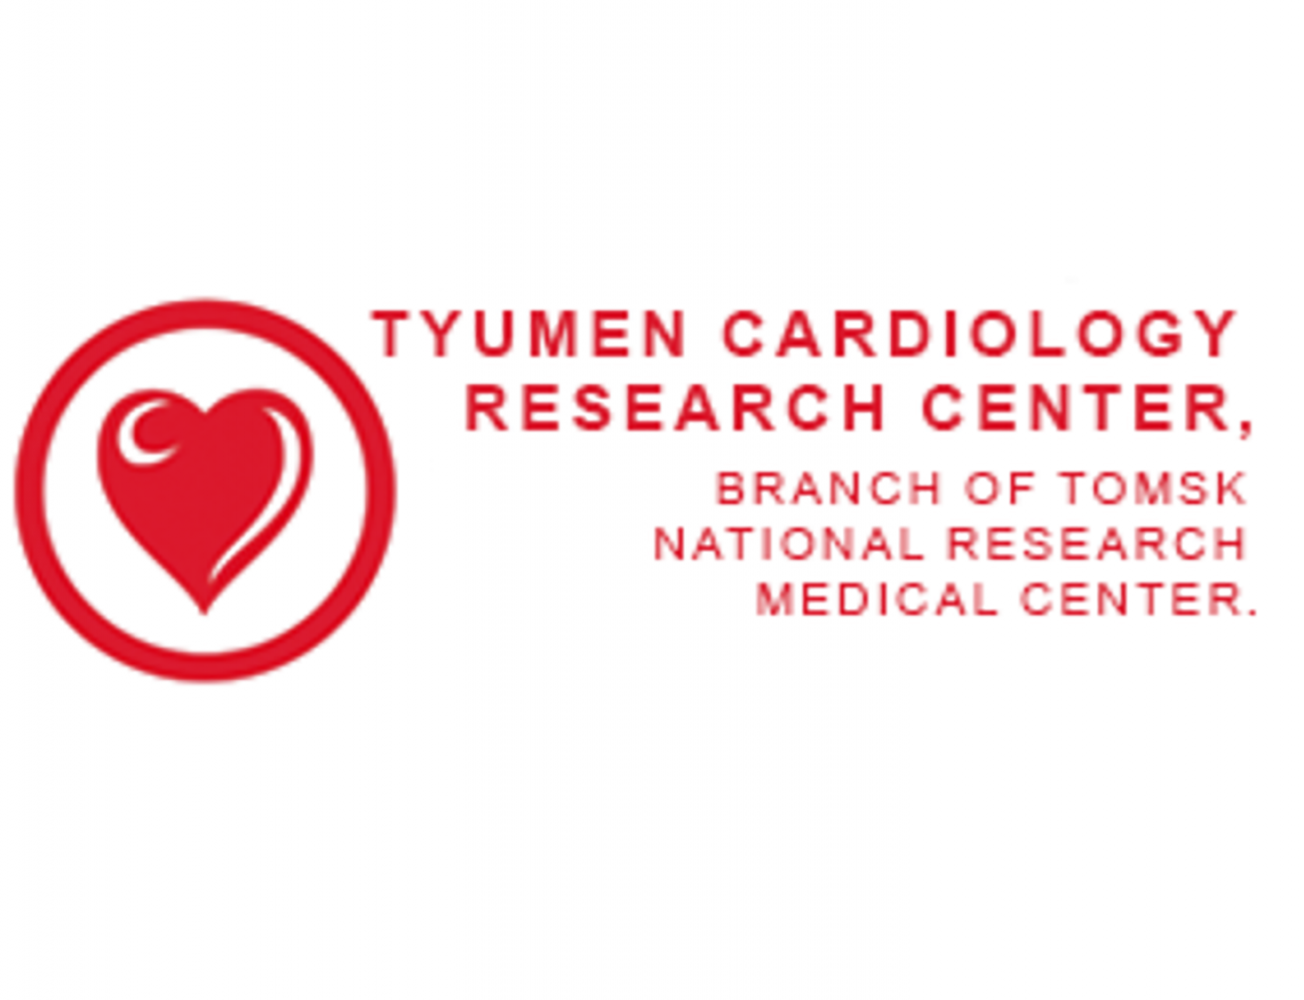 Open meeting of the Tyumen Regional Branch of the Russian Society of Cardiology